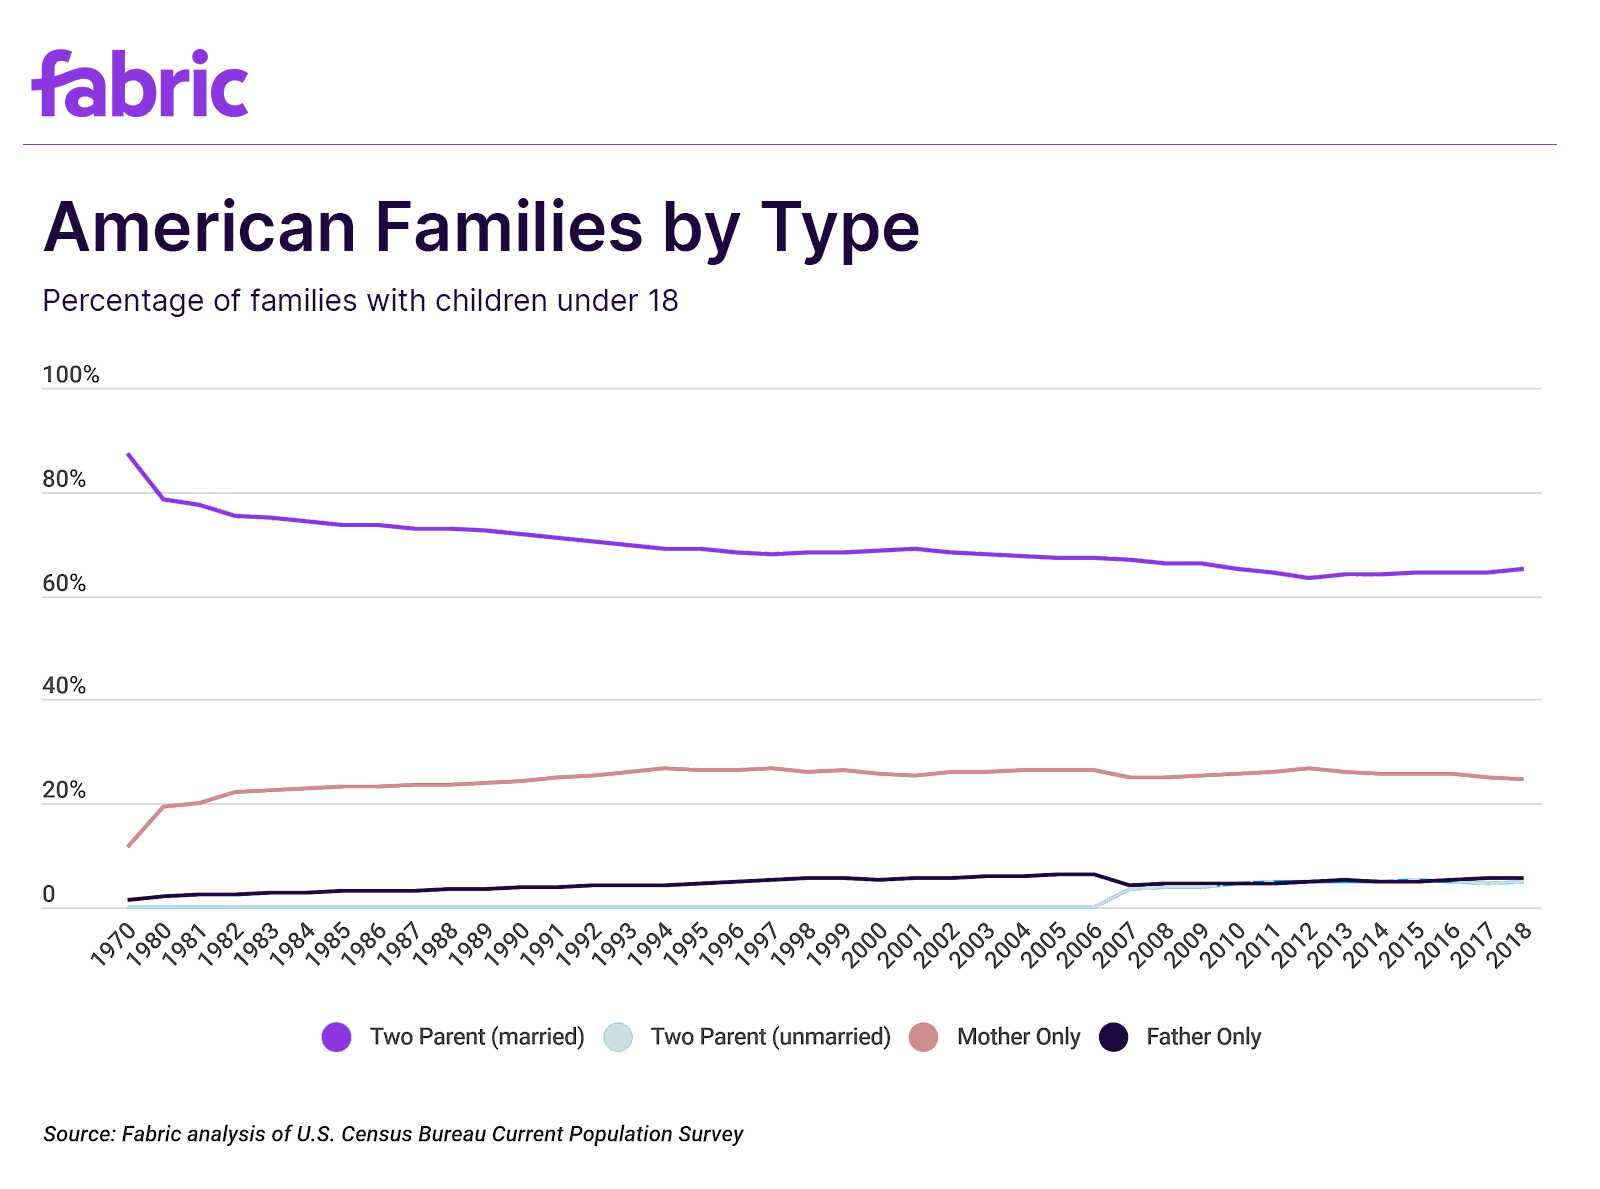 American families by whether they are headed by mother only, father only, two parents married or two parents unmarried